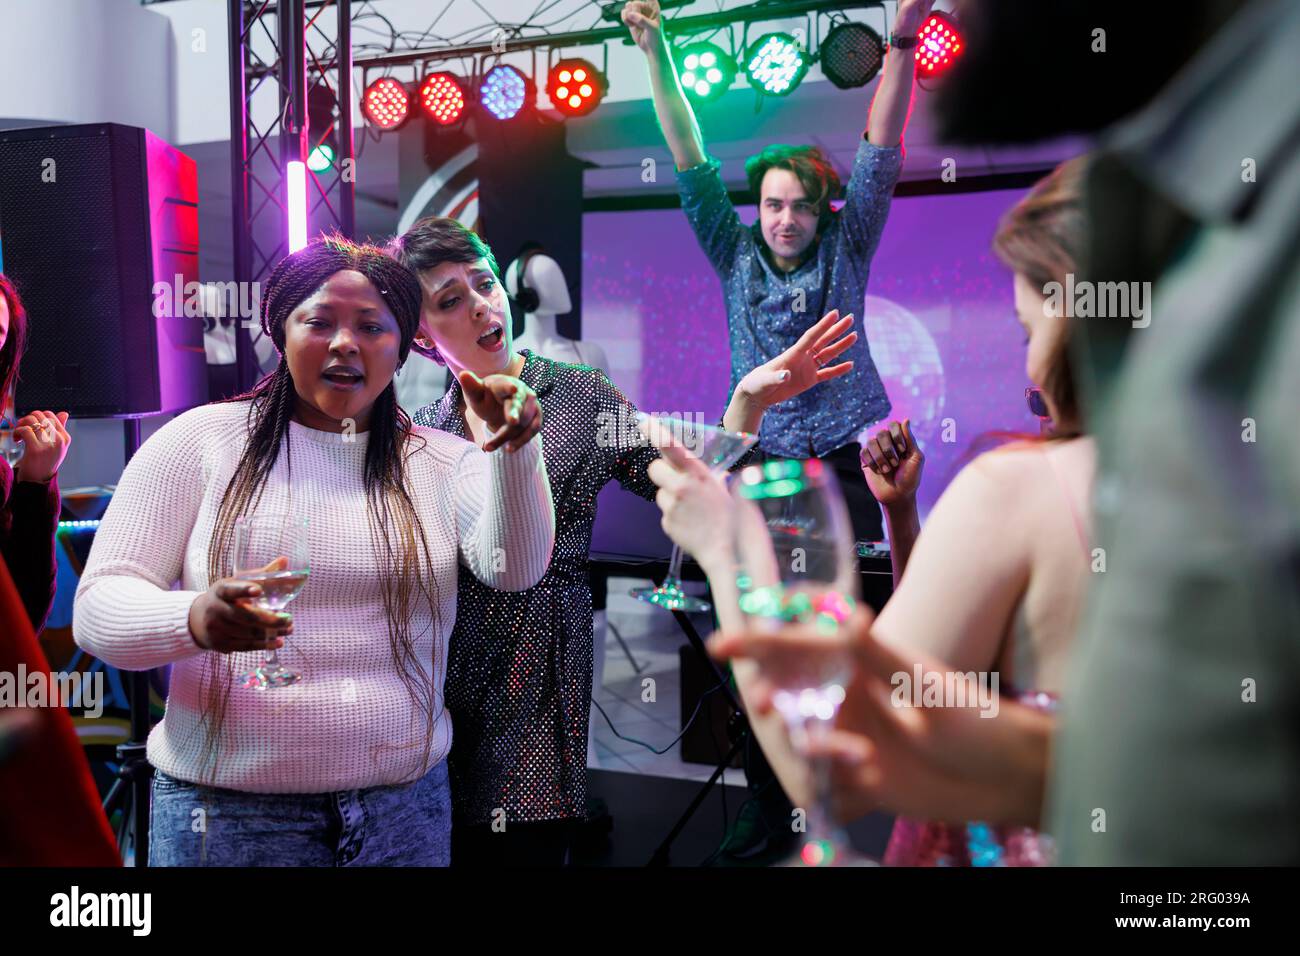 People drinking alcohol, dancing and singing at nightclub party with live music. Cheerful crowd relaxing, enjoying beverages and having fun on dancefloor at social gathering in club Stock Photo